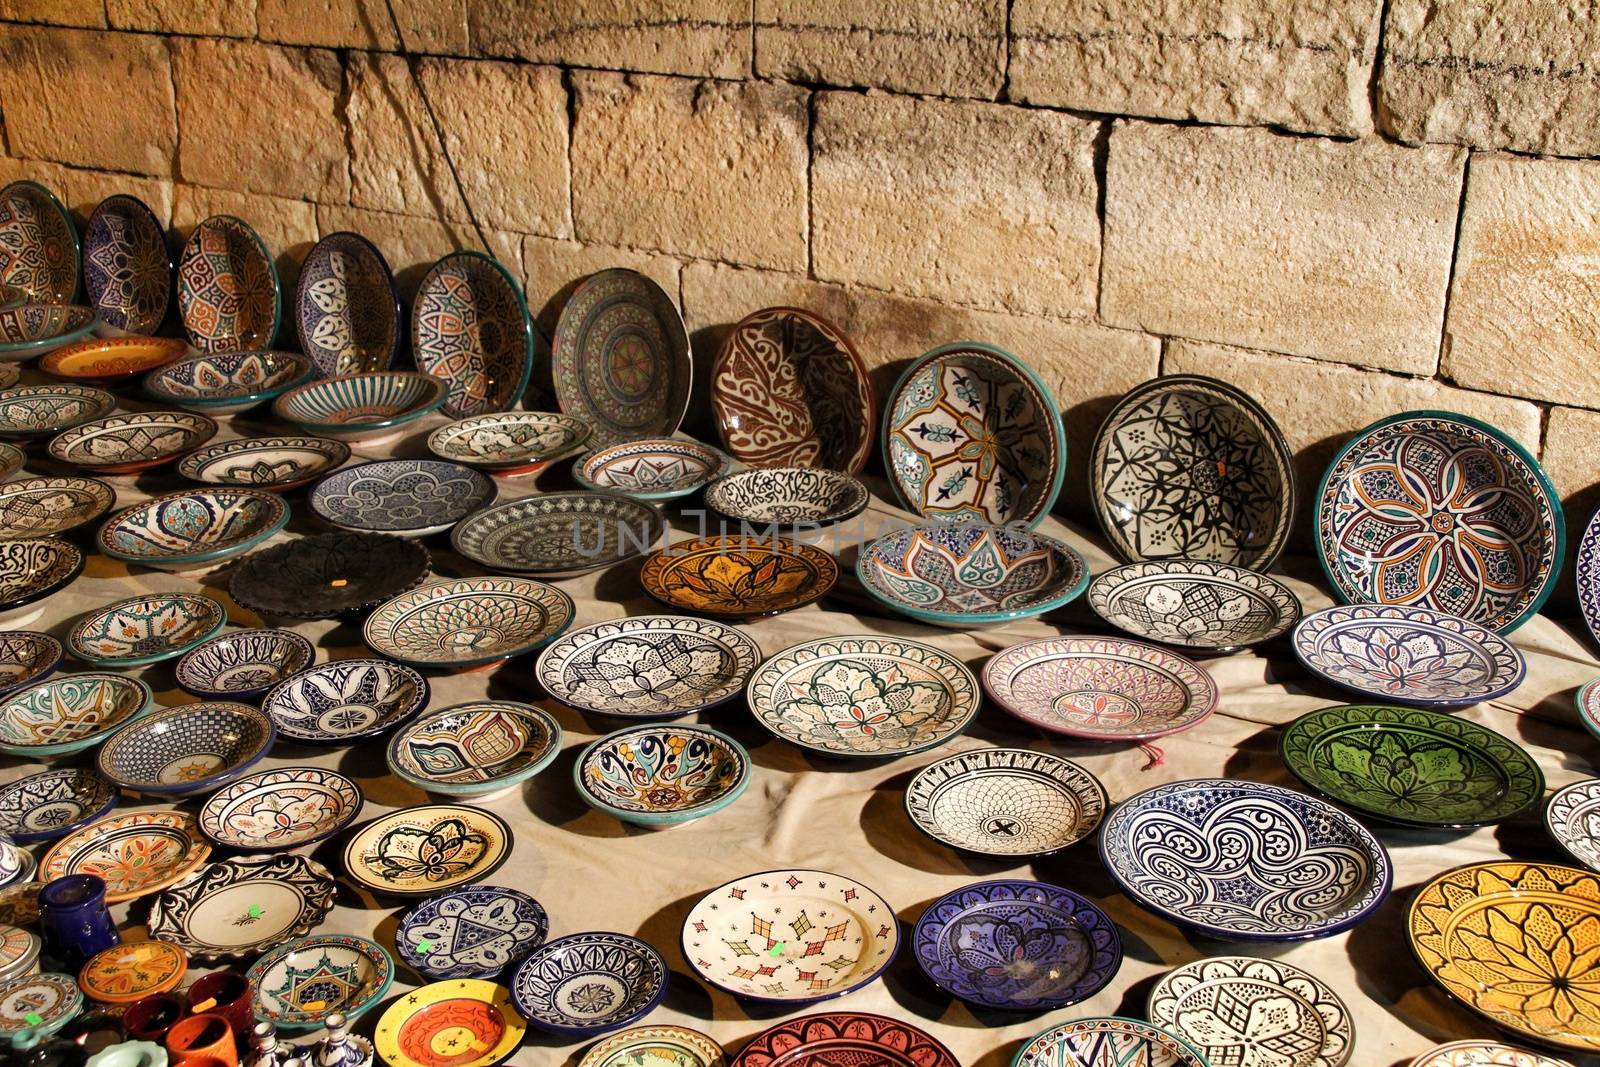 Beautiful and colorful ceramic plates for sale at a medieval market stall